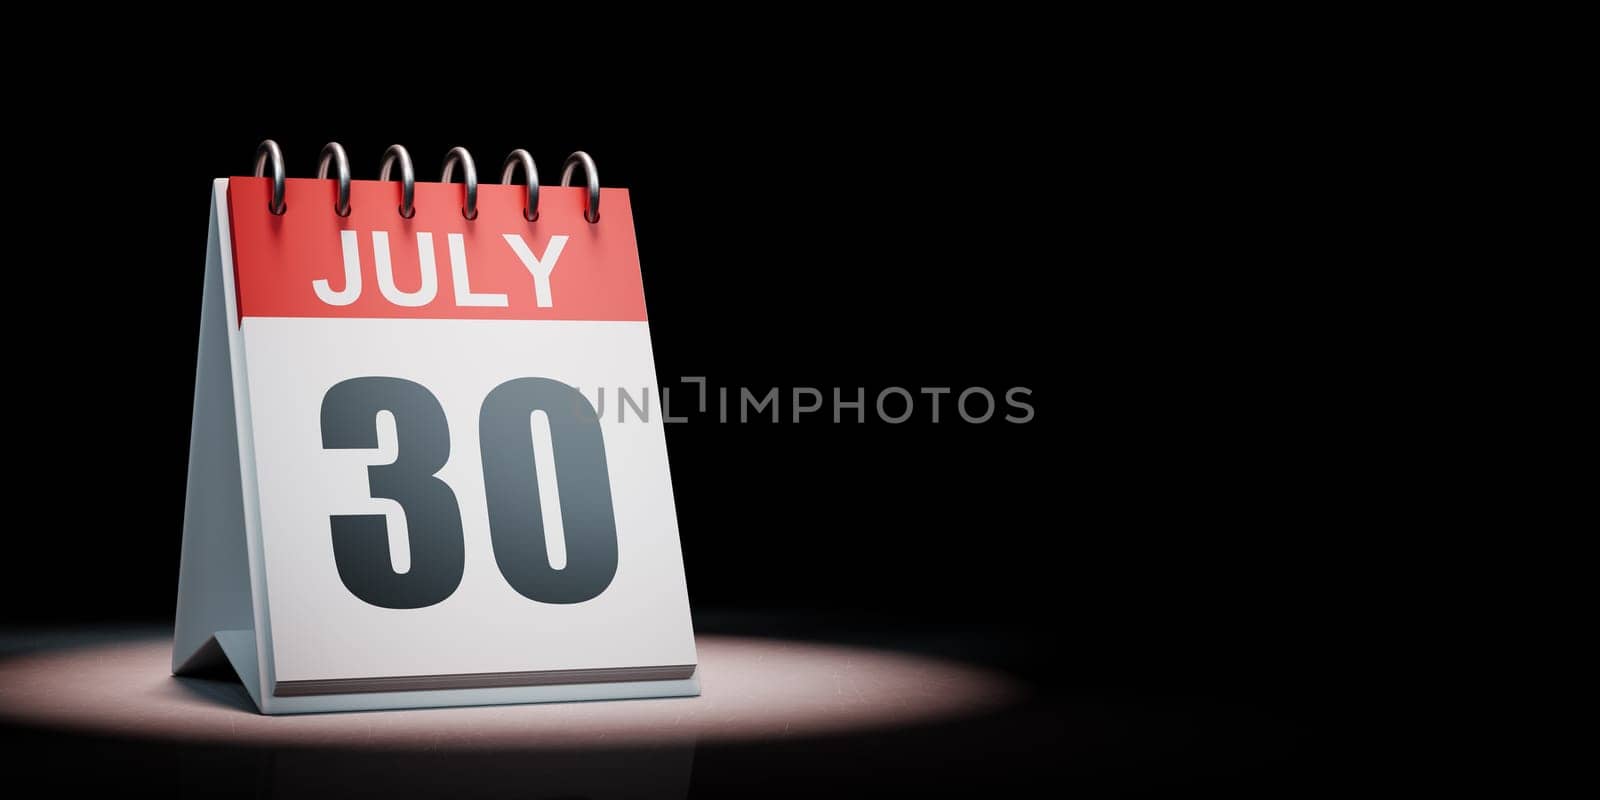 Red and White July 30 Desk Calendar Spotlighted on Black Background with Copy Space 3D Illustration